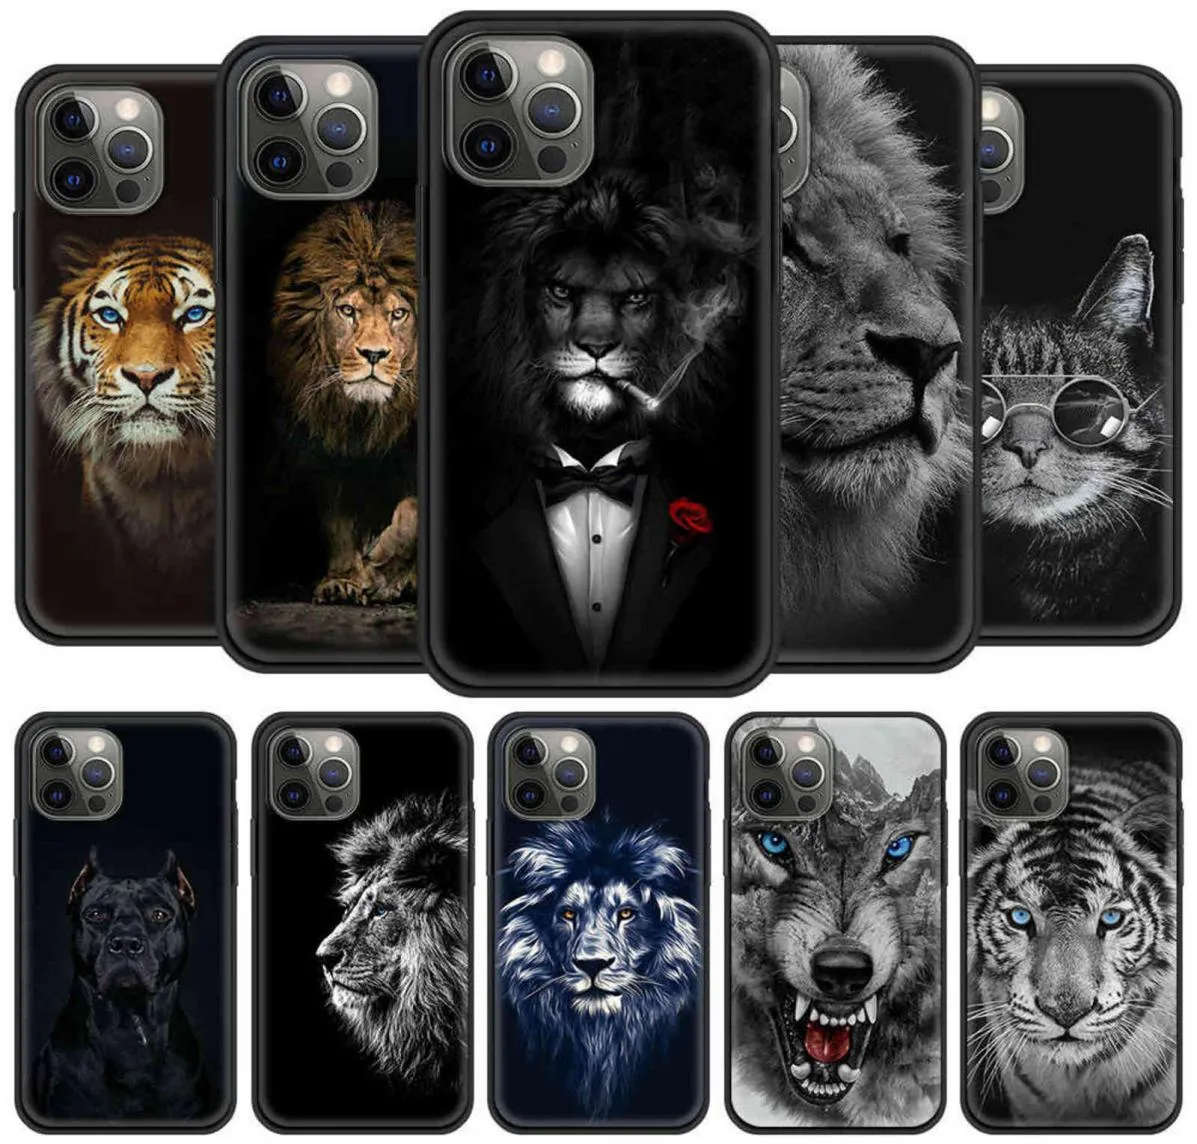 iPhone 11 Pro 12 Pro Max XR 7 8 SE 2020 X XS Max 6 7 8 Plus Luxury Black Shell Cover Wolf Lion Animal Funda Y10284138060 용 전화 케이스